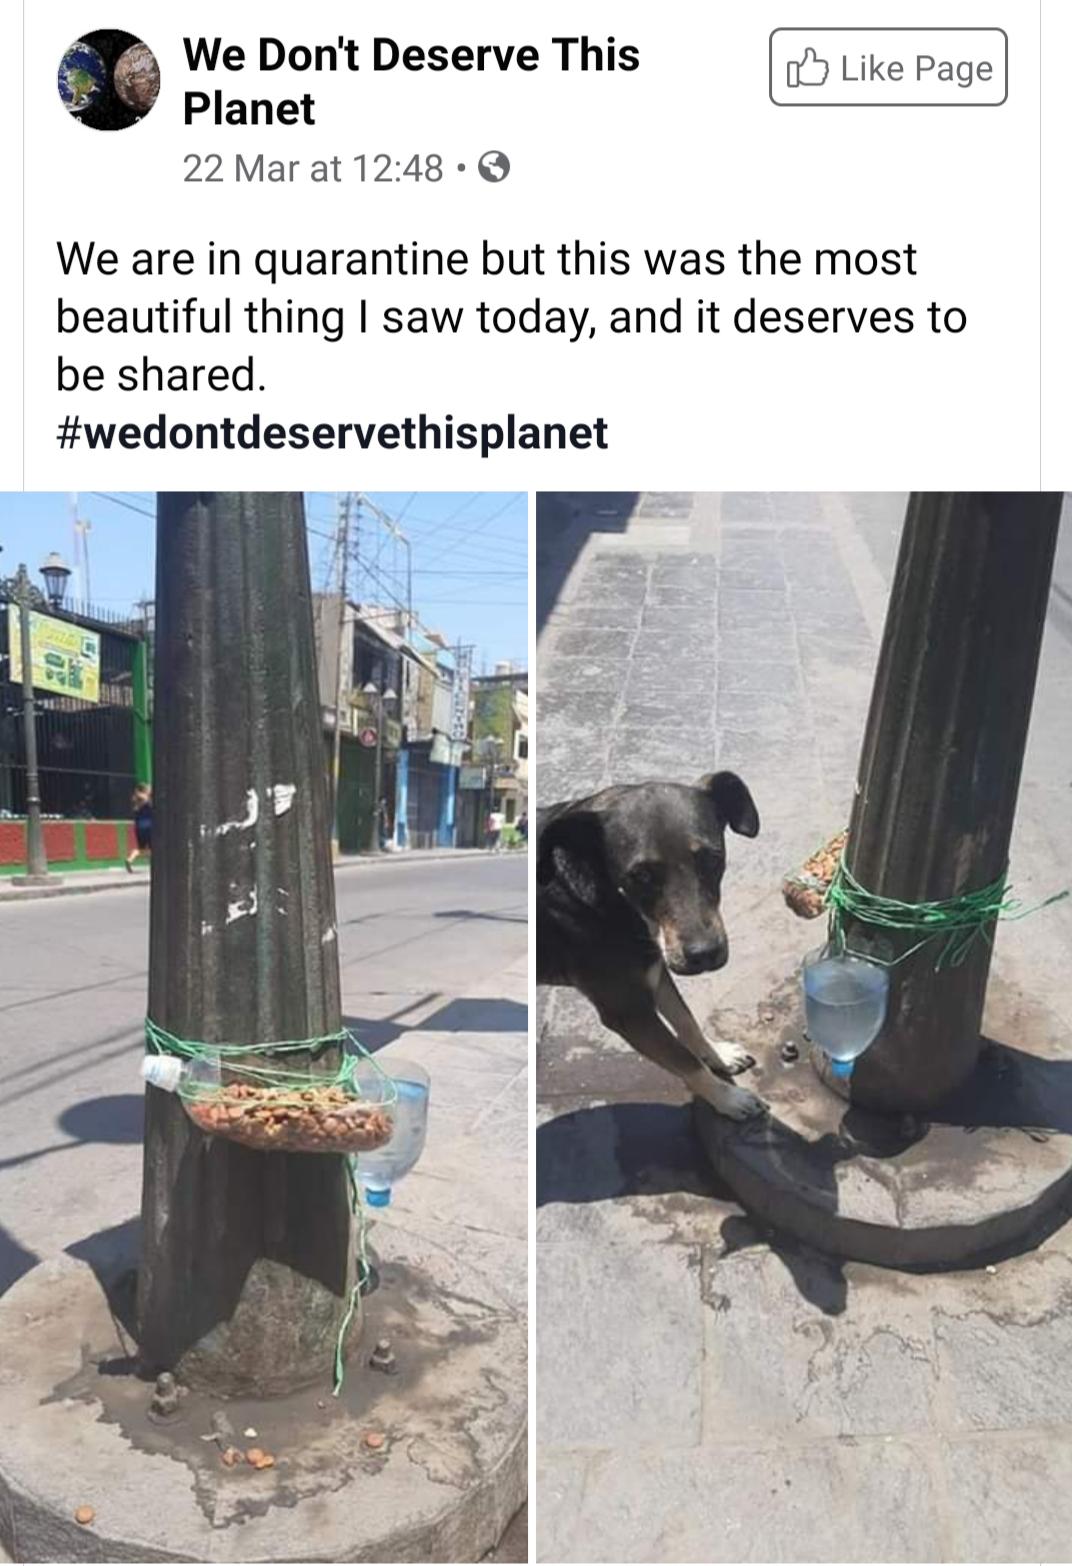 dog - Page We Don't Deserve This Planet 22 Mar at We are in quarantine but this was the most beautiful thing I saw today, and it deserves to be d.